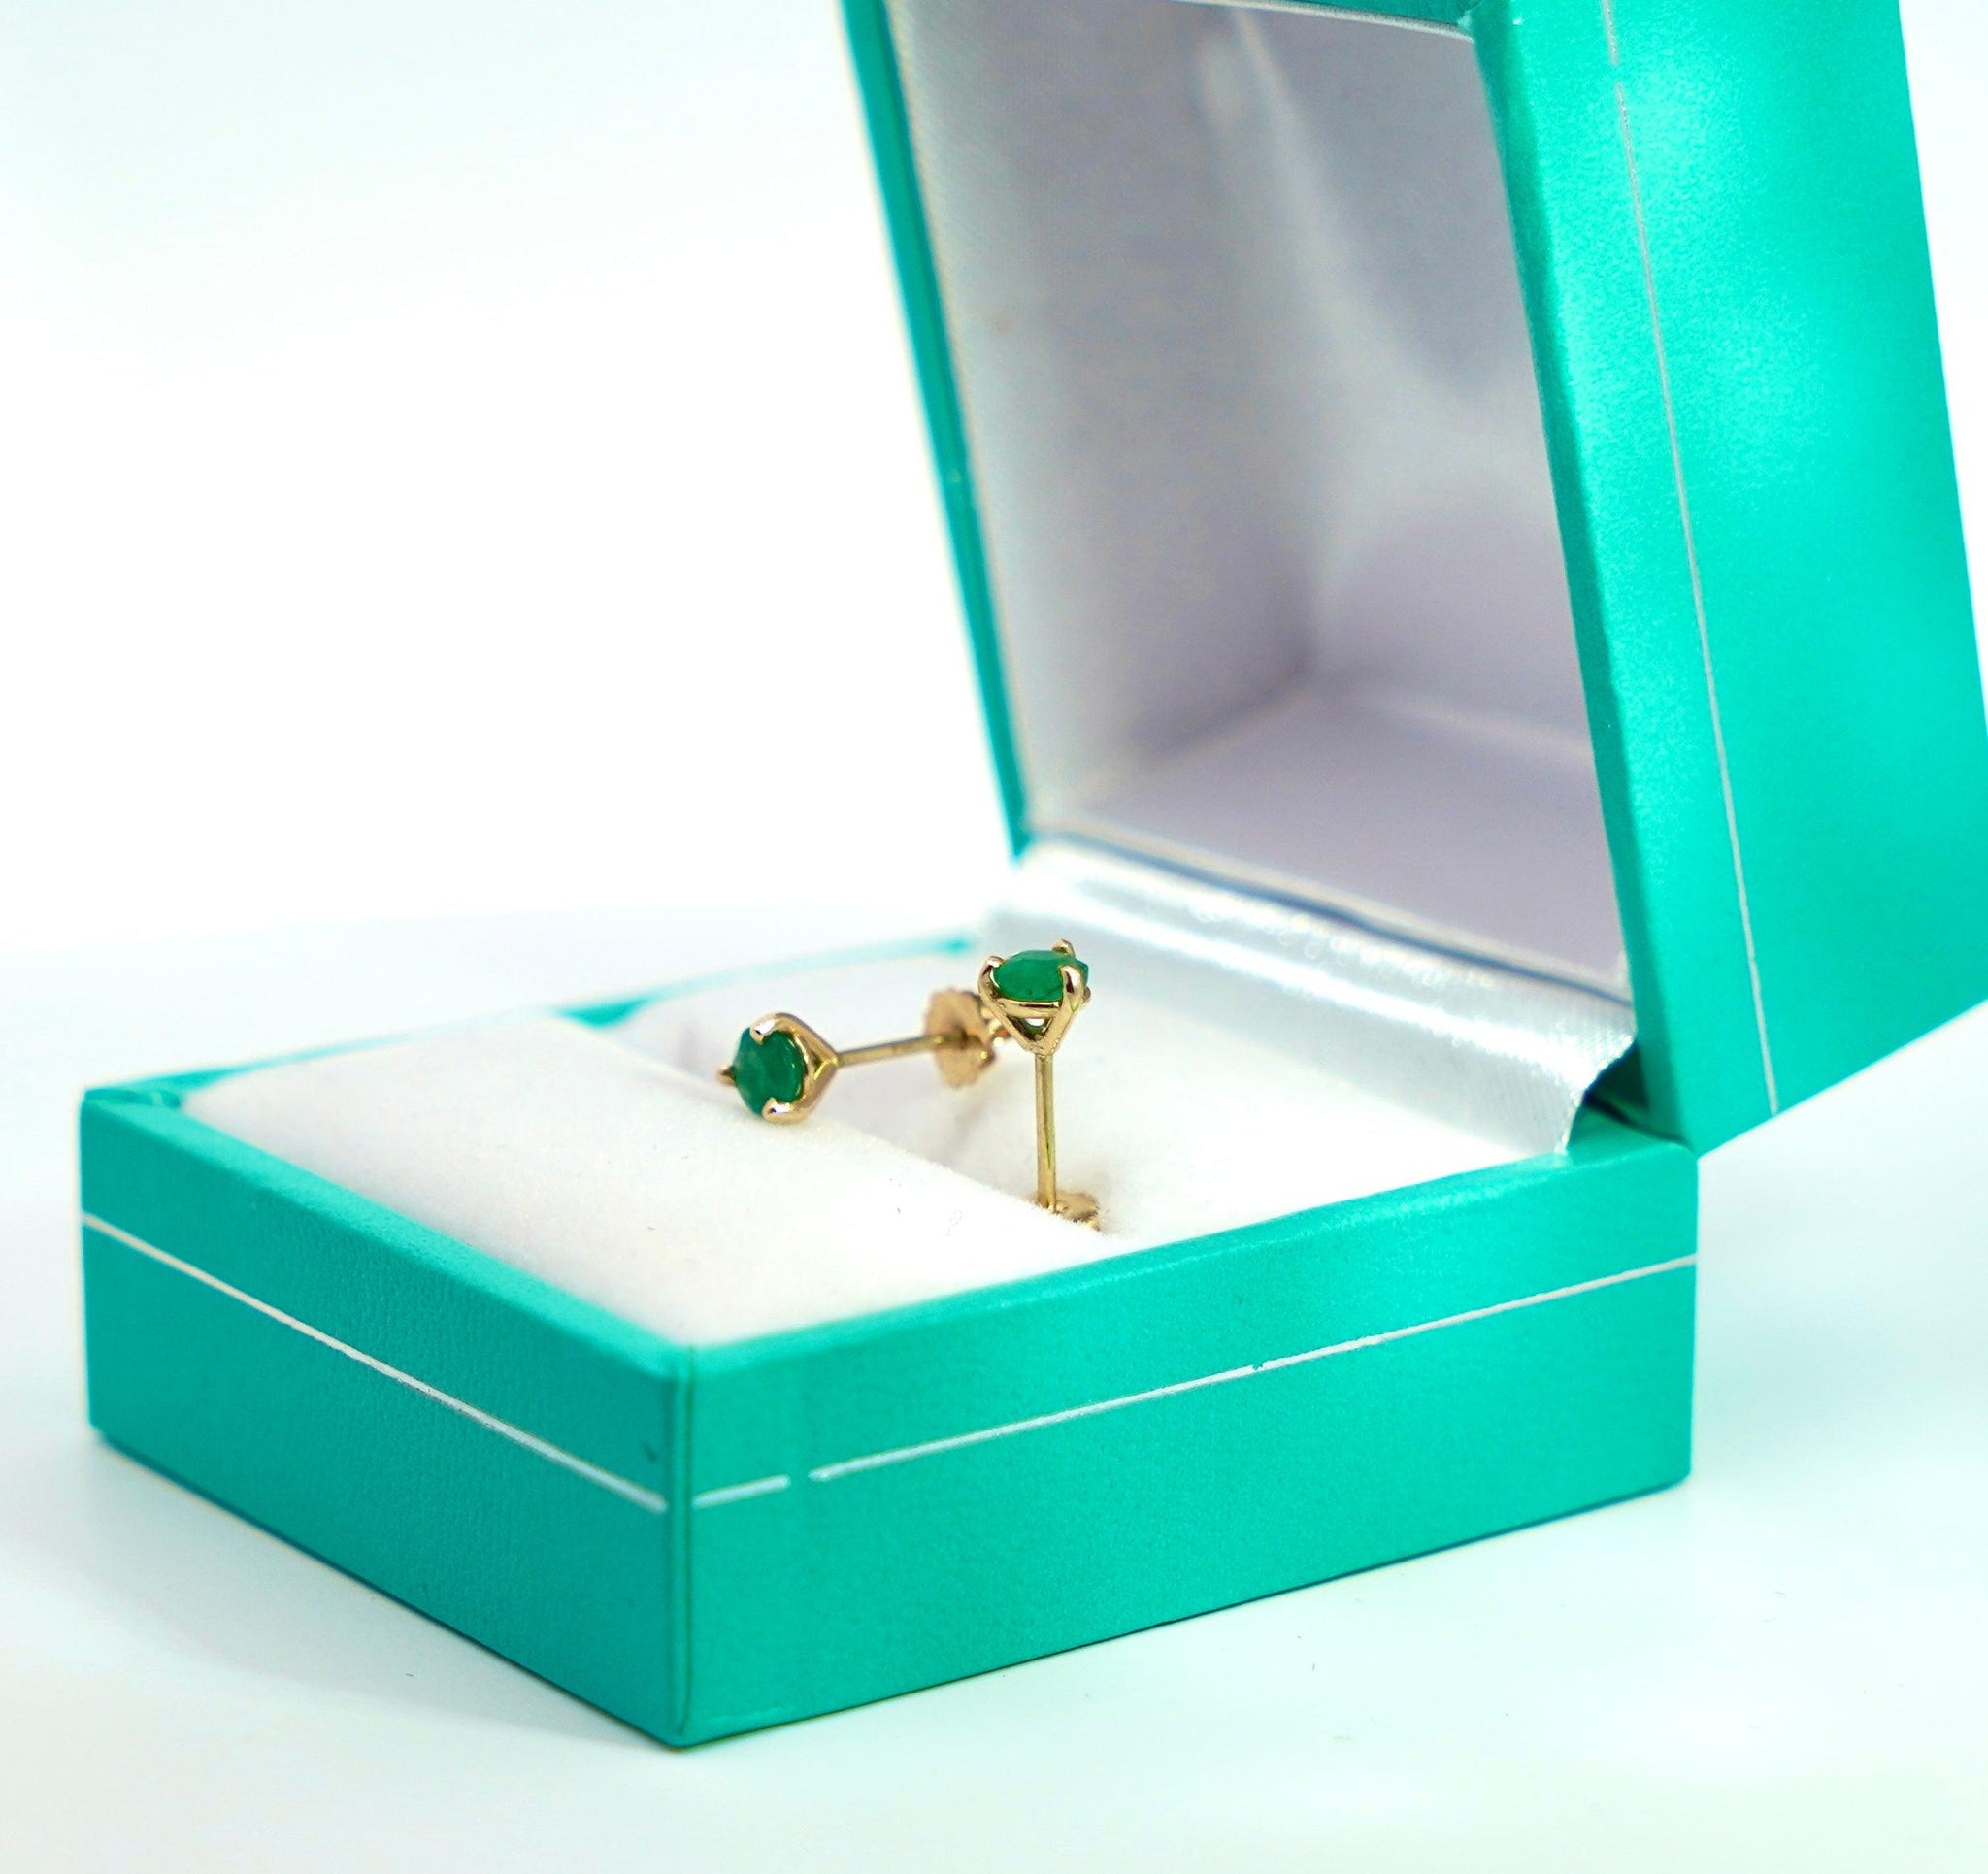 1/2 Carat Round Cut Natural Emerald Stud Earrings in 14K Yellow Gold 3-Prong Martini Setting